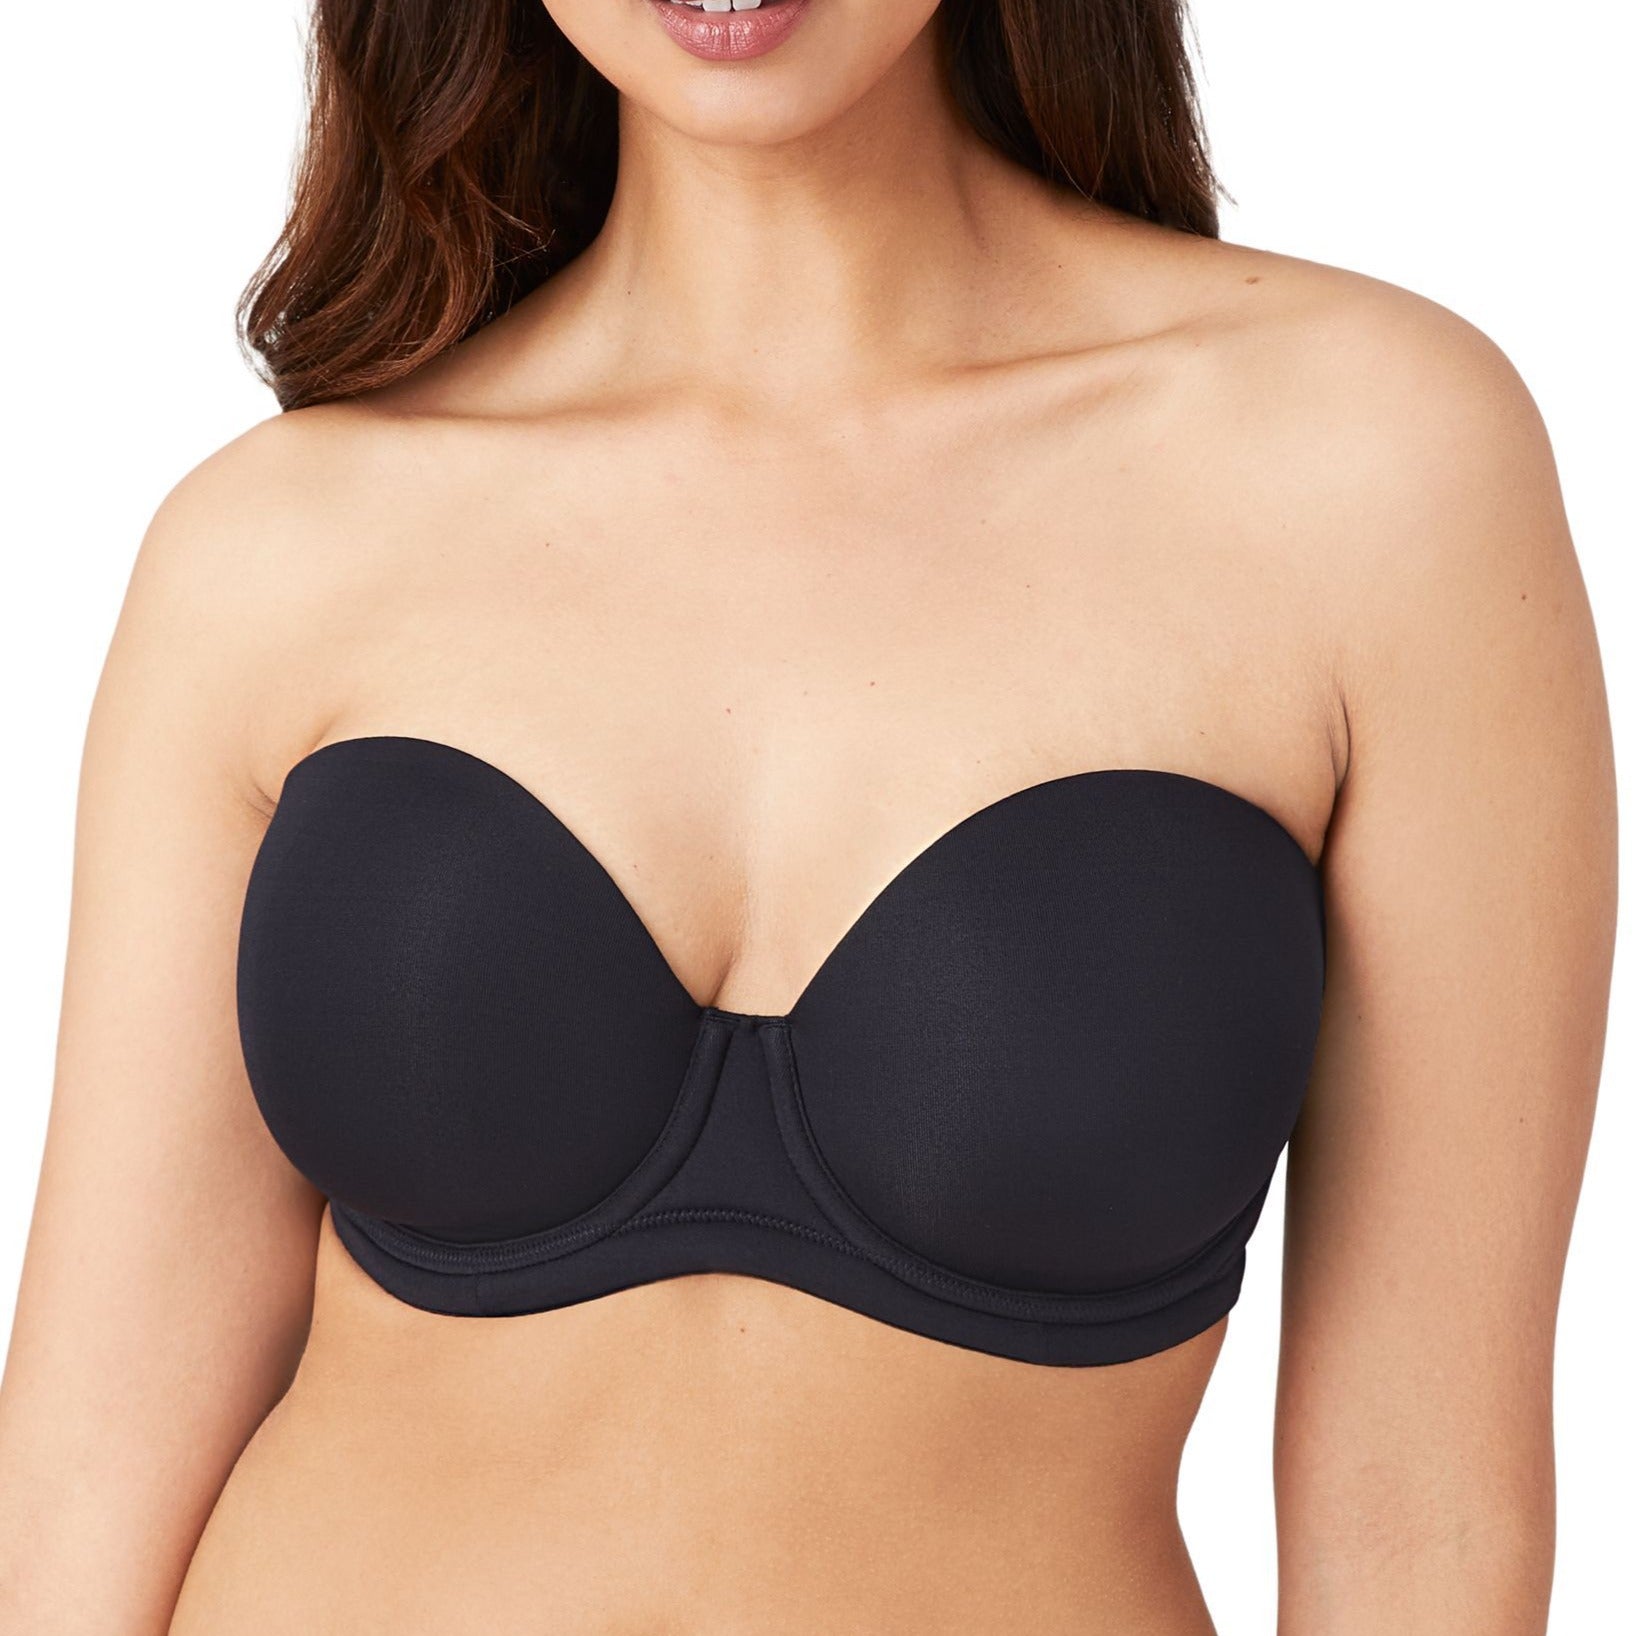 Muses Mall Strapless Push-up Bra Women Bra Invisible Strapless